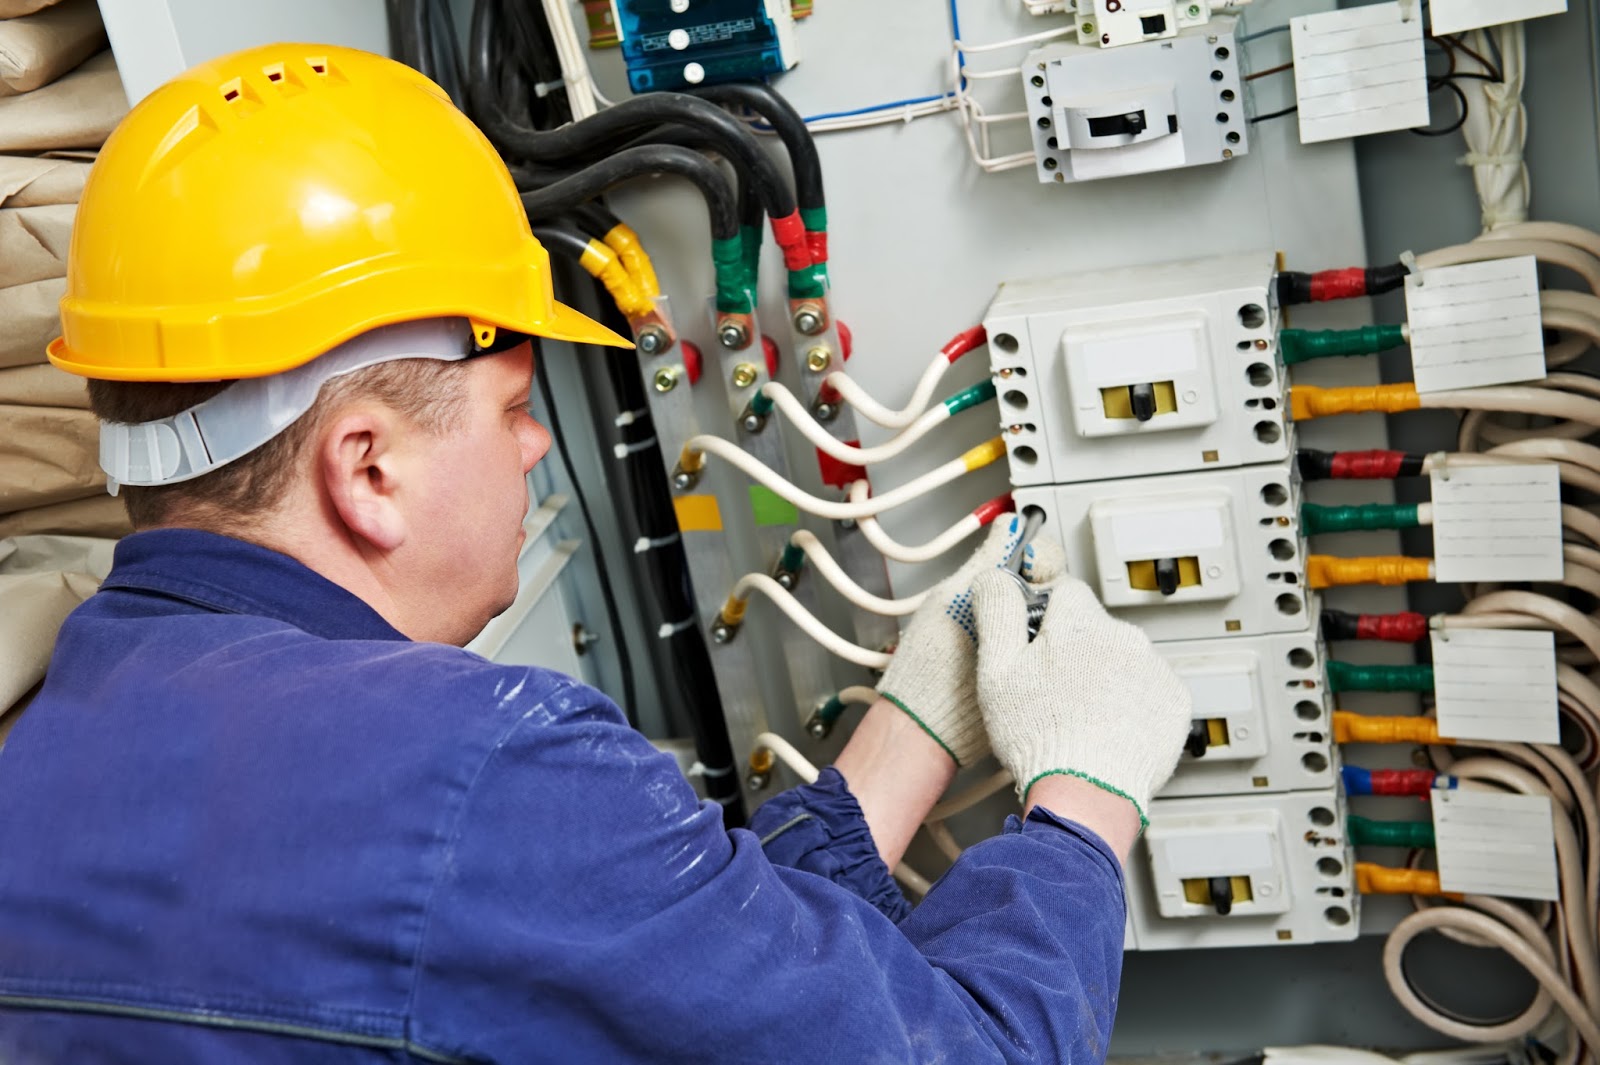 Works of repair,finishing and electrical installation